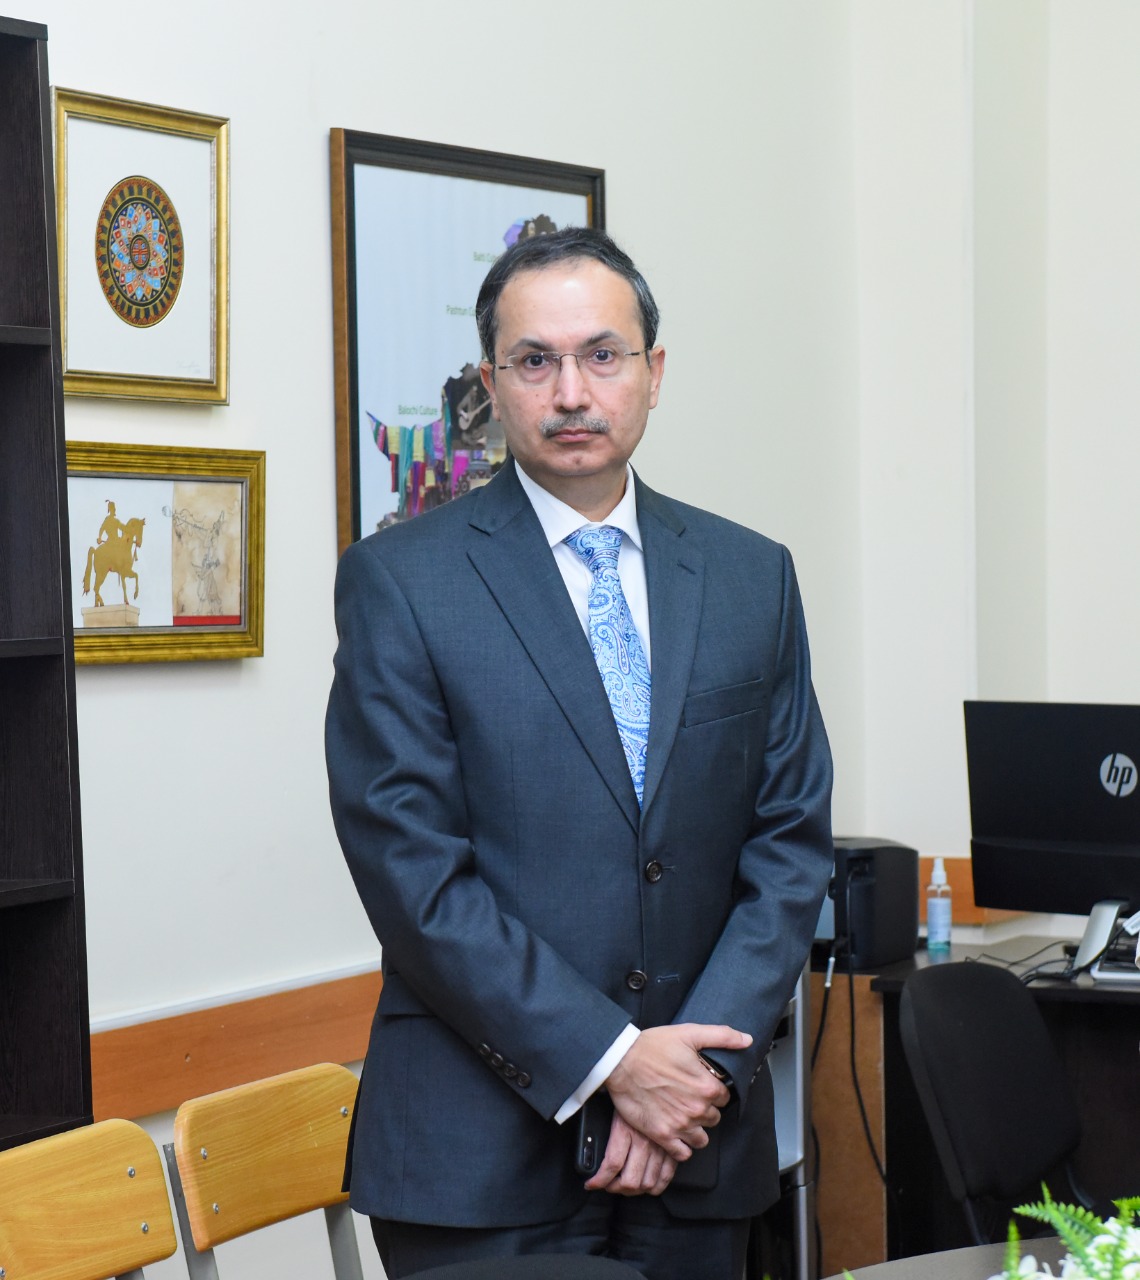 The idea of the Pakistan Cultural Centre was conceived by Ambassador Bilal Hayee after his meeting with the Rector of ADU. Later it was implemented with the help of the Azerbaijan University of Languages.